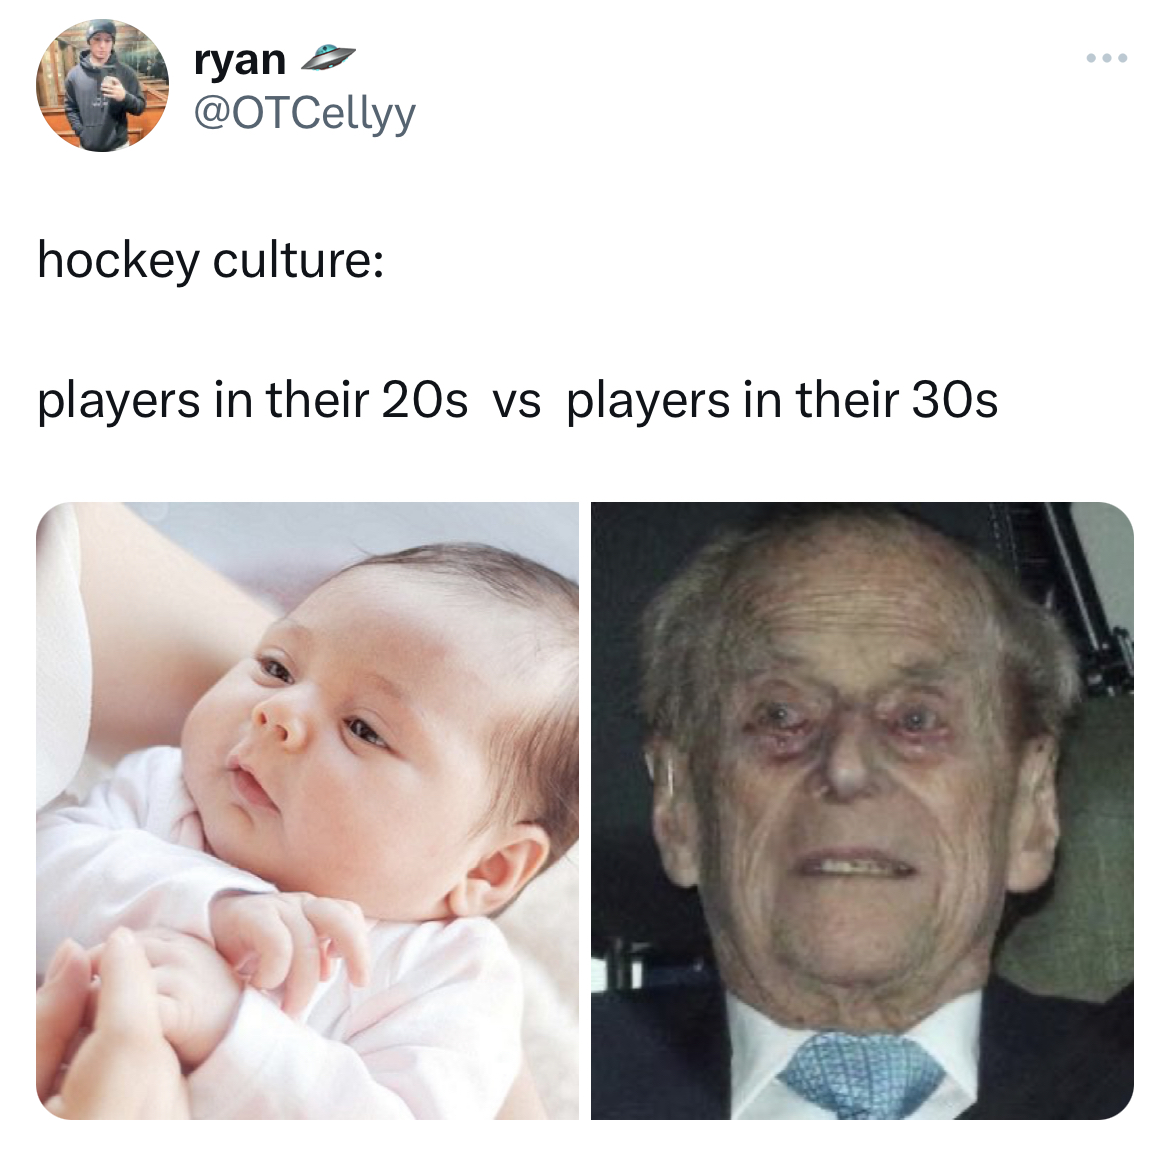 savage tweets - head - ryan hockey culture players in their 20s vs players in their 30s www